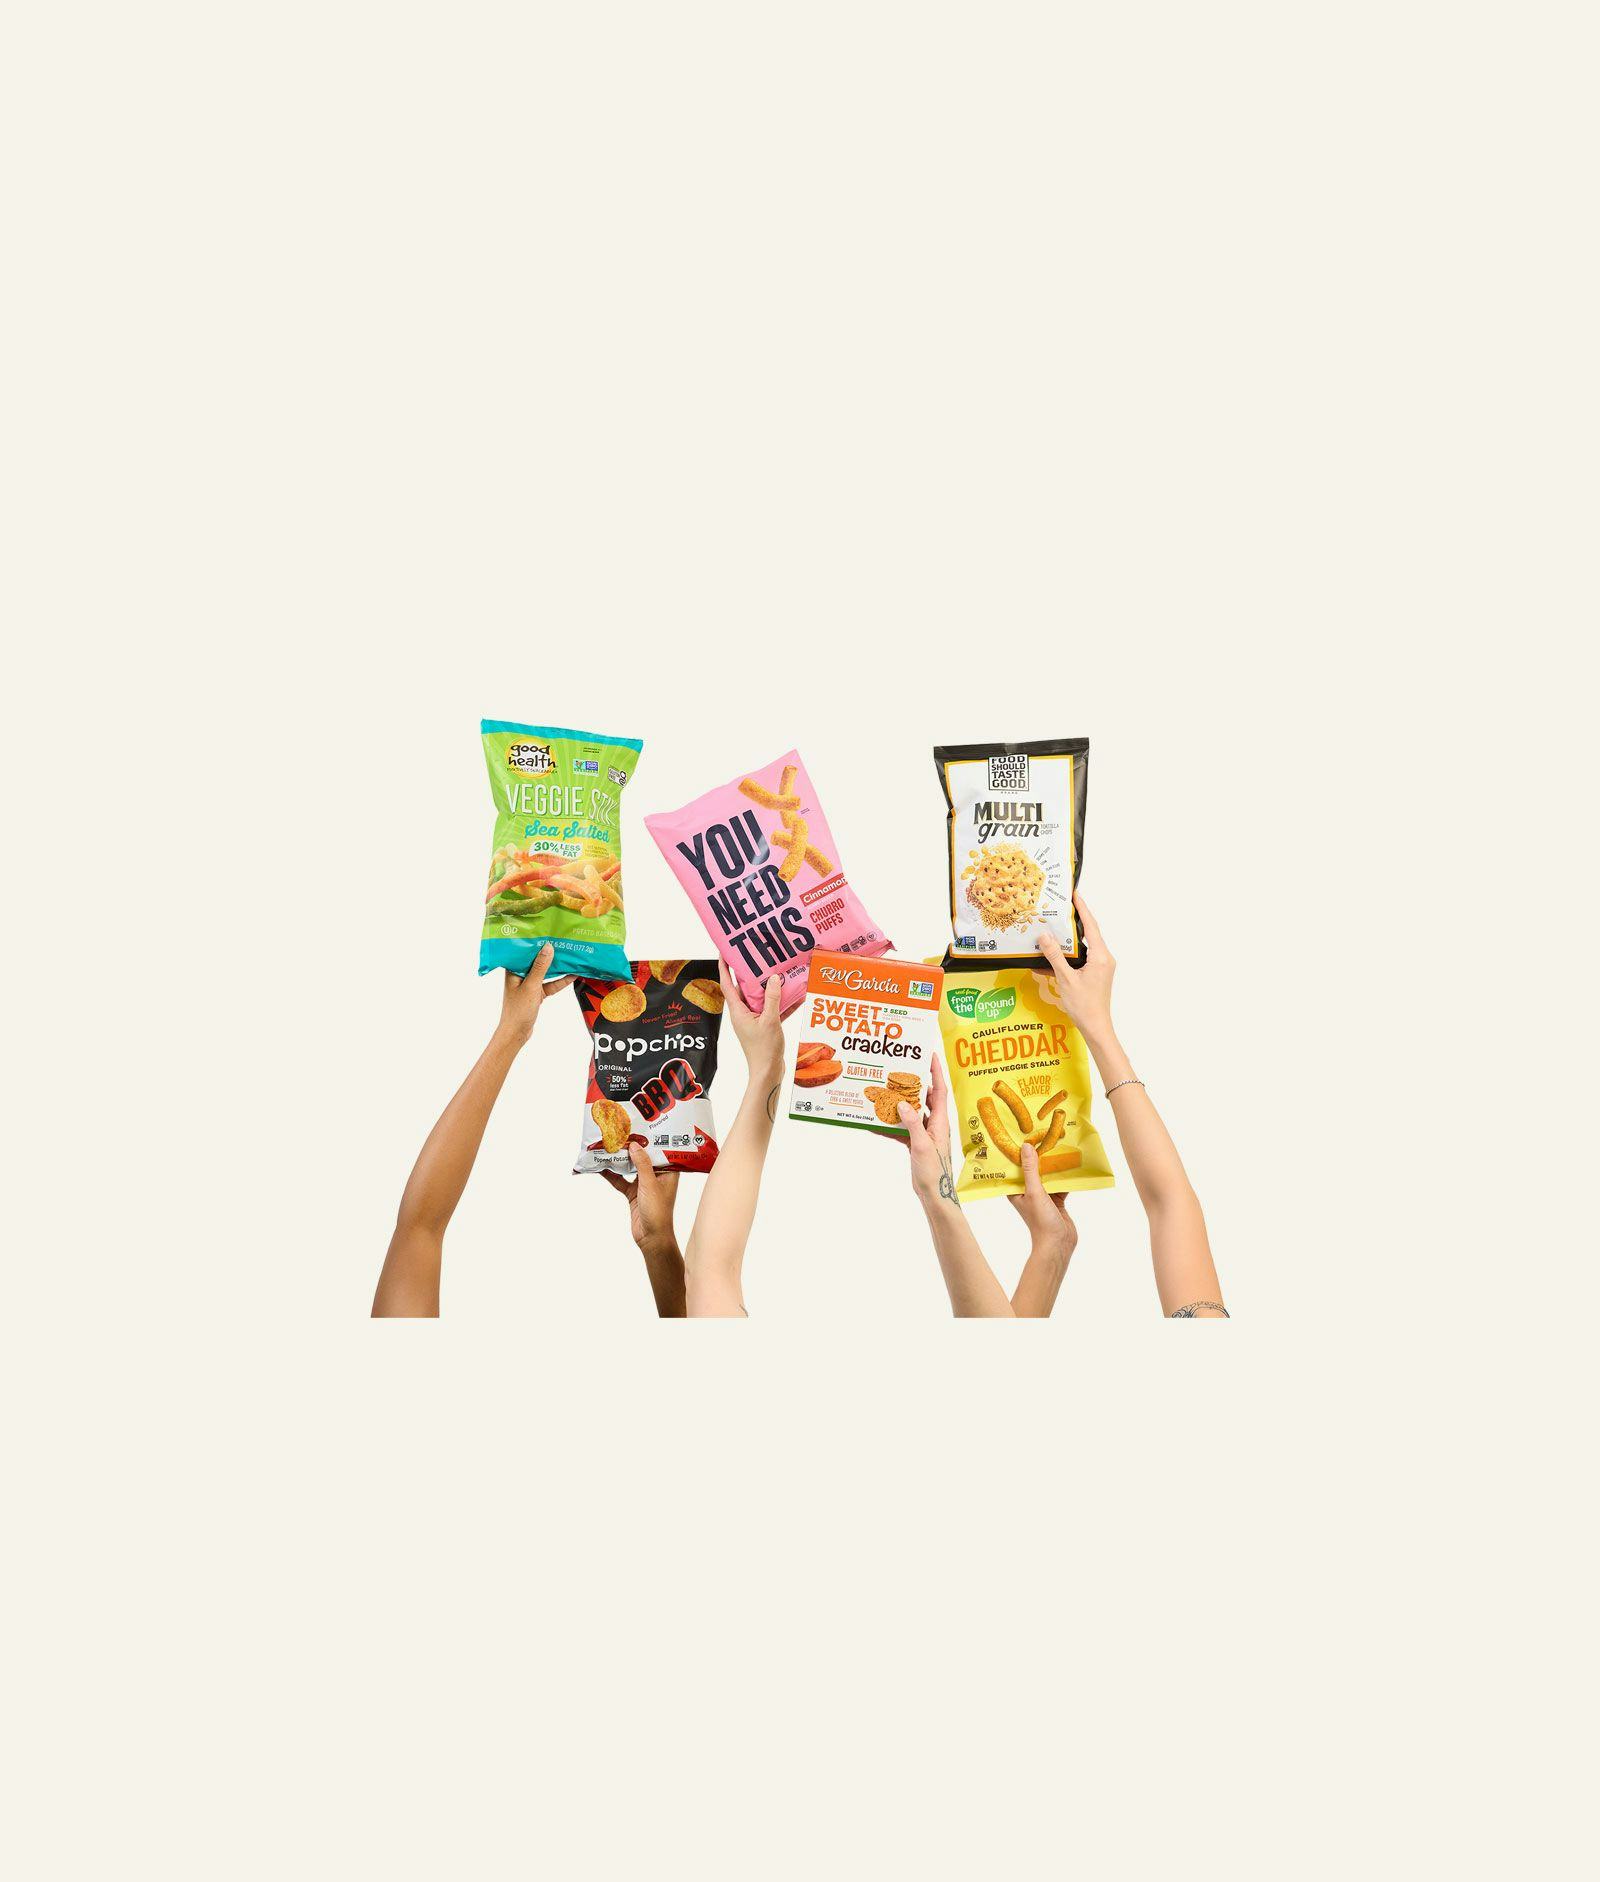 Our Home snack brands held up into the air.